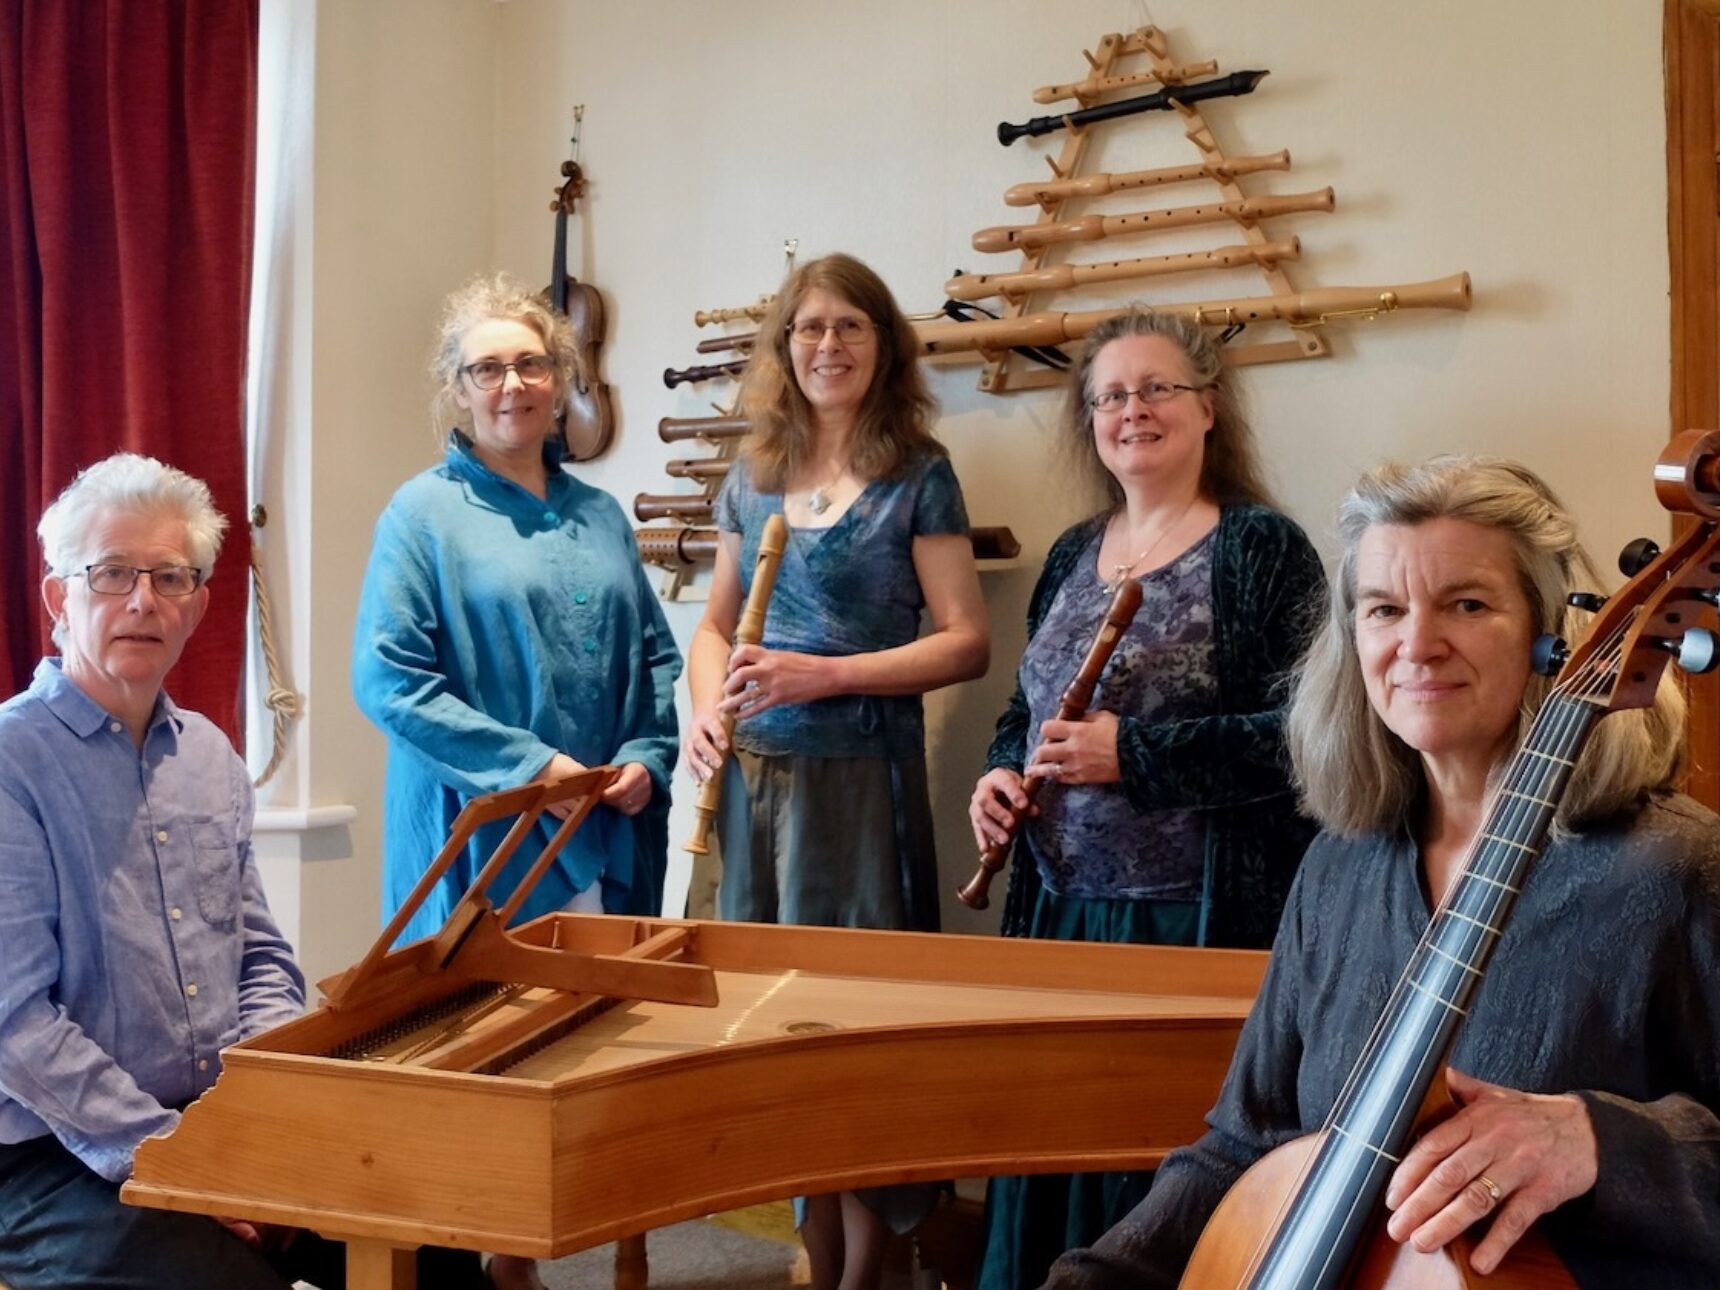 Northwick Baroque will be performing on Wednesday 29th May